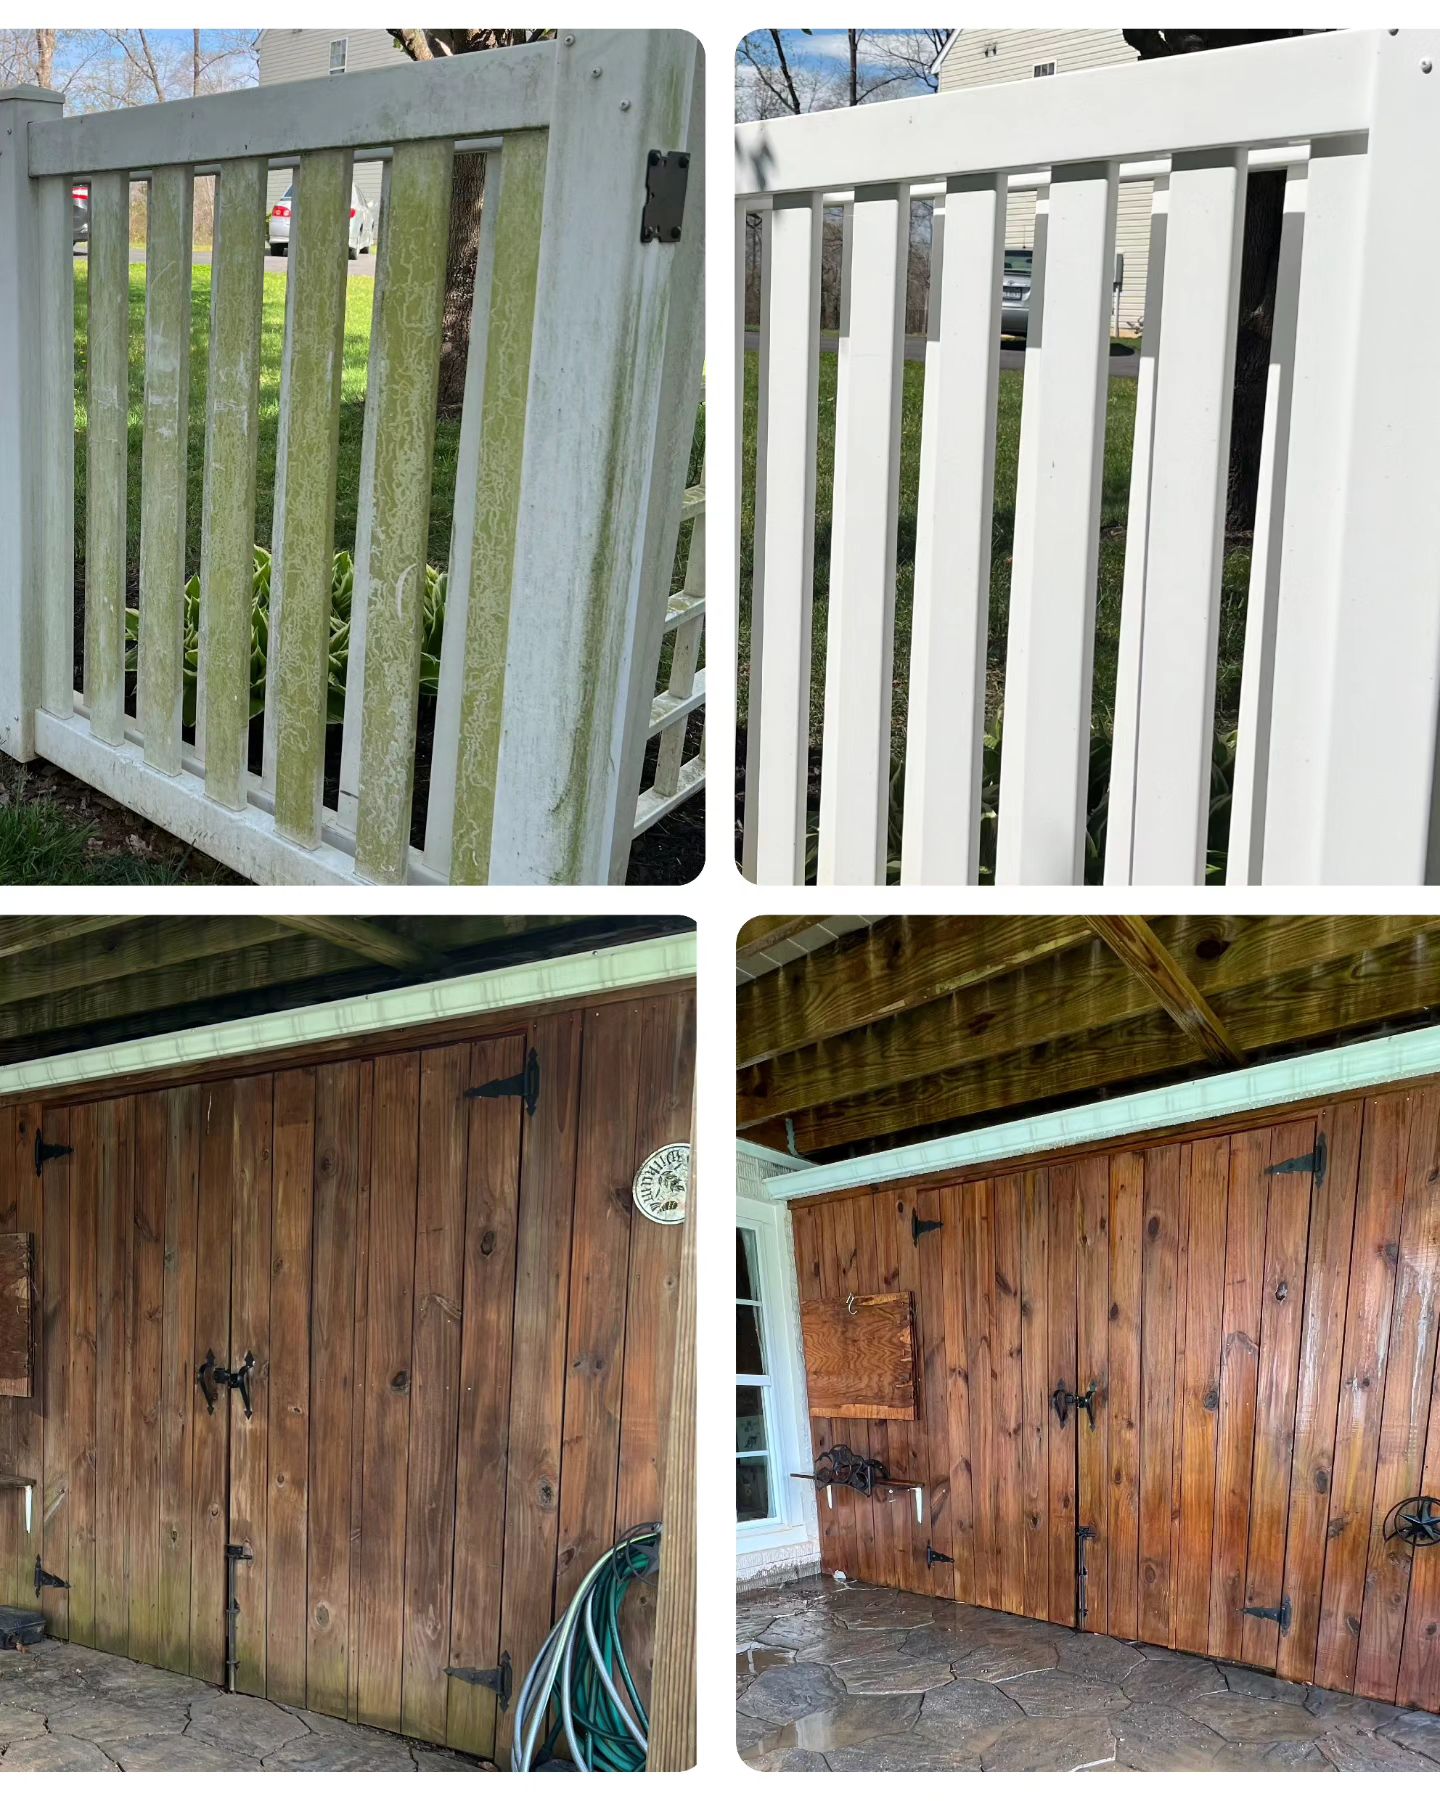 Check out these awesome Before & Afters on a few projects this week 📸📸 from King George to Spotsylvania to Stafford to Orange. You need it, we complete it 👍👌
Excited to complete these wood deck stainings, shed stainings, and interior painting 🏡🚿🖌
www.pressureandsoftwashingwcap.com